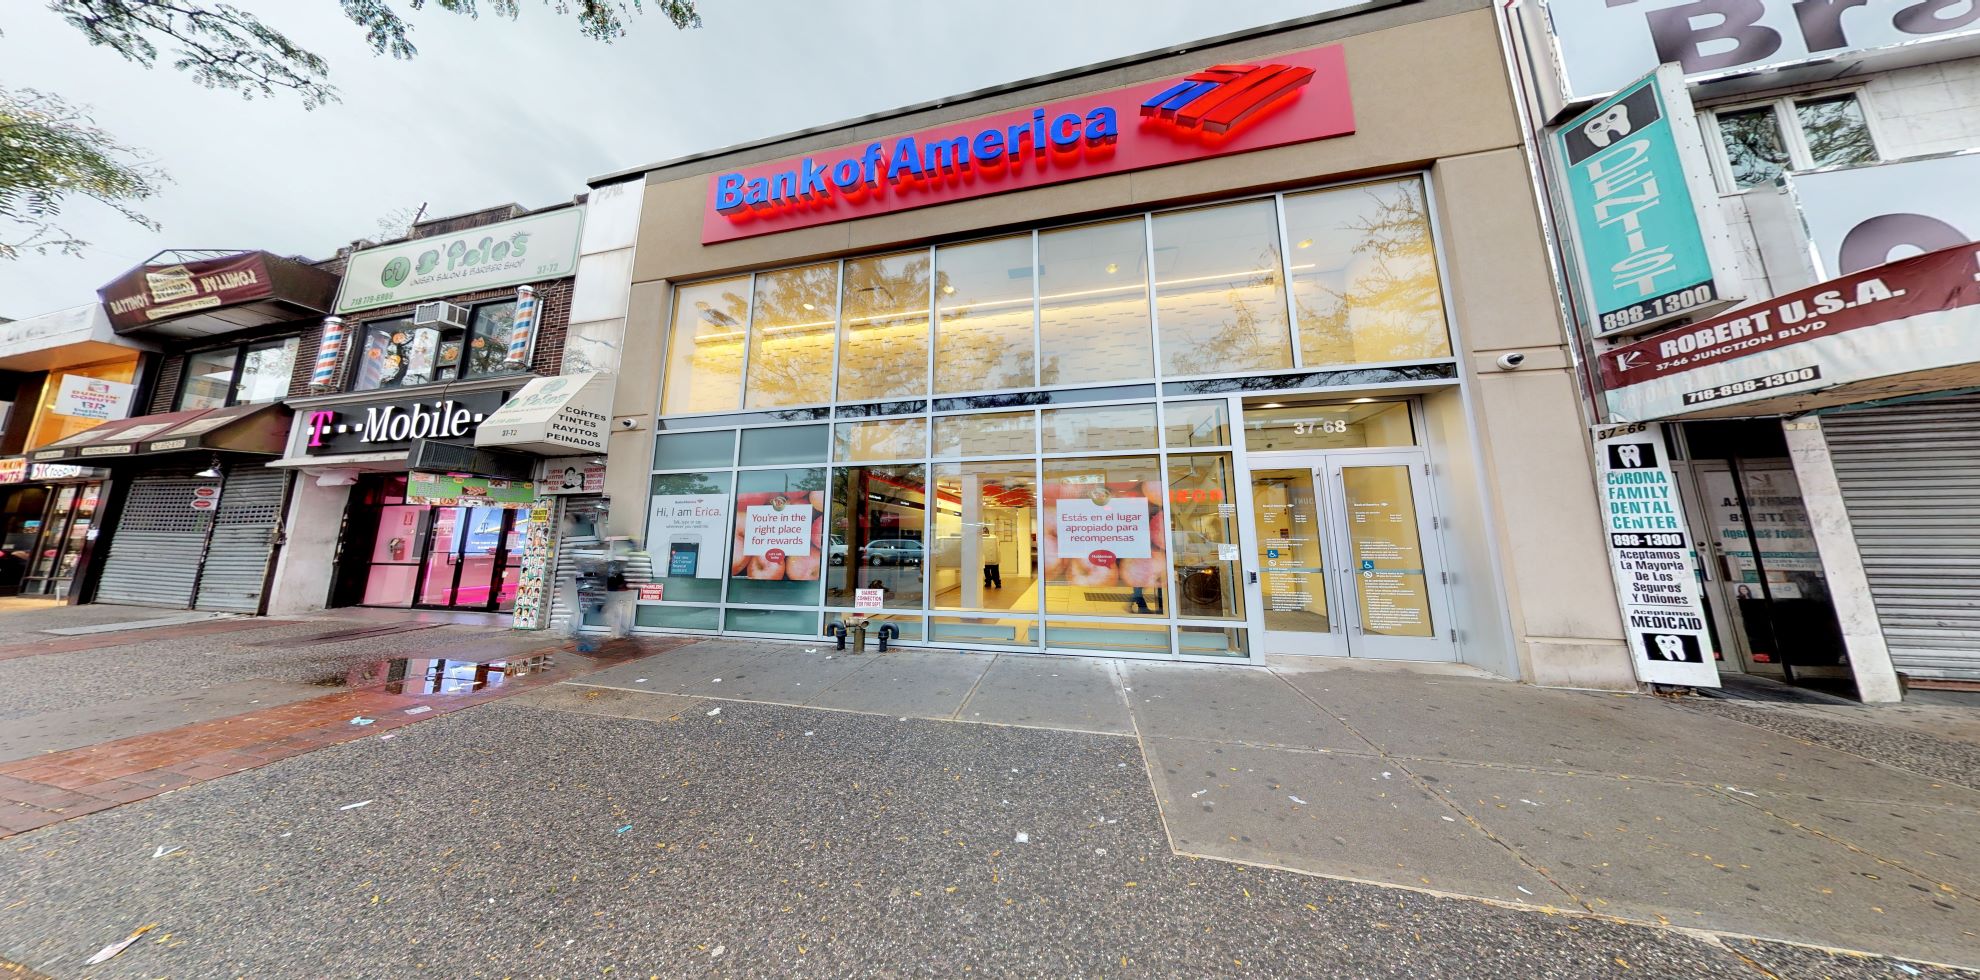 Bank of America financial center with walk-up ATM | 3768 Junction Blvd, Corona, NY 11368